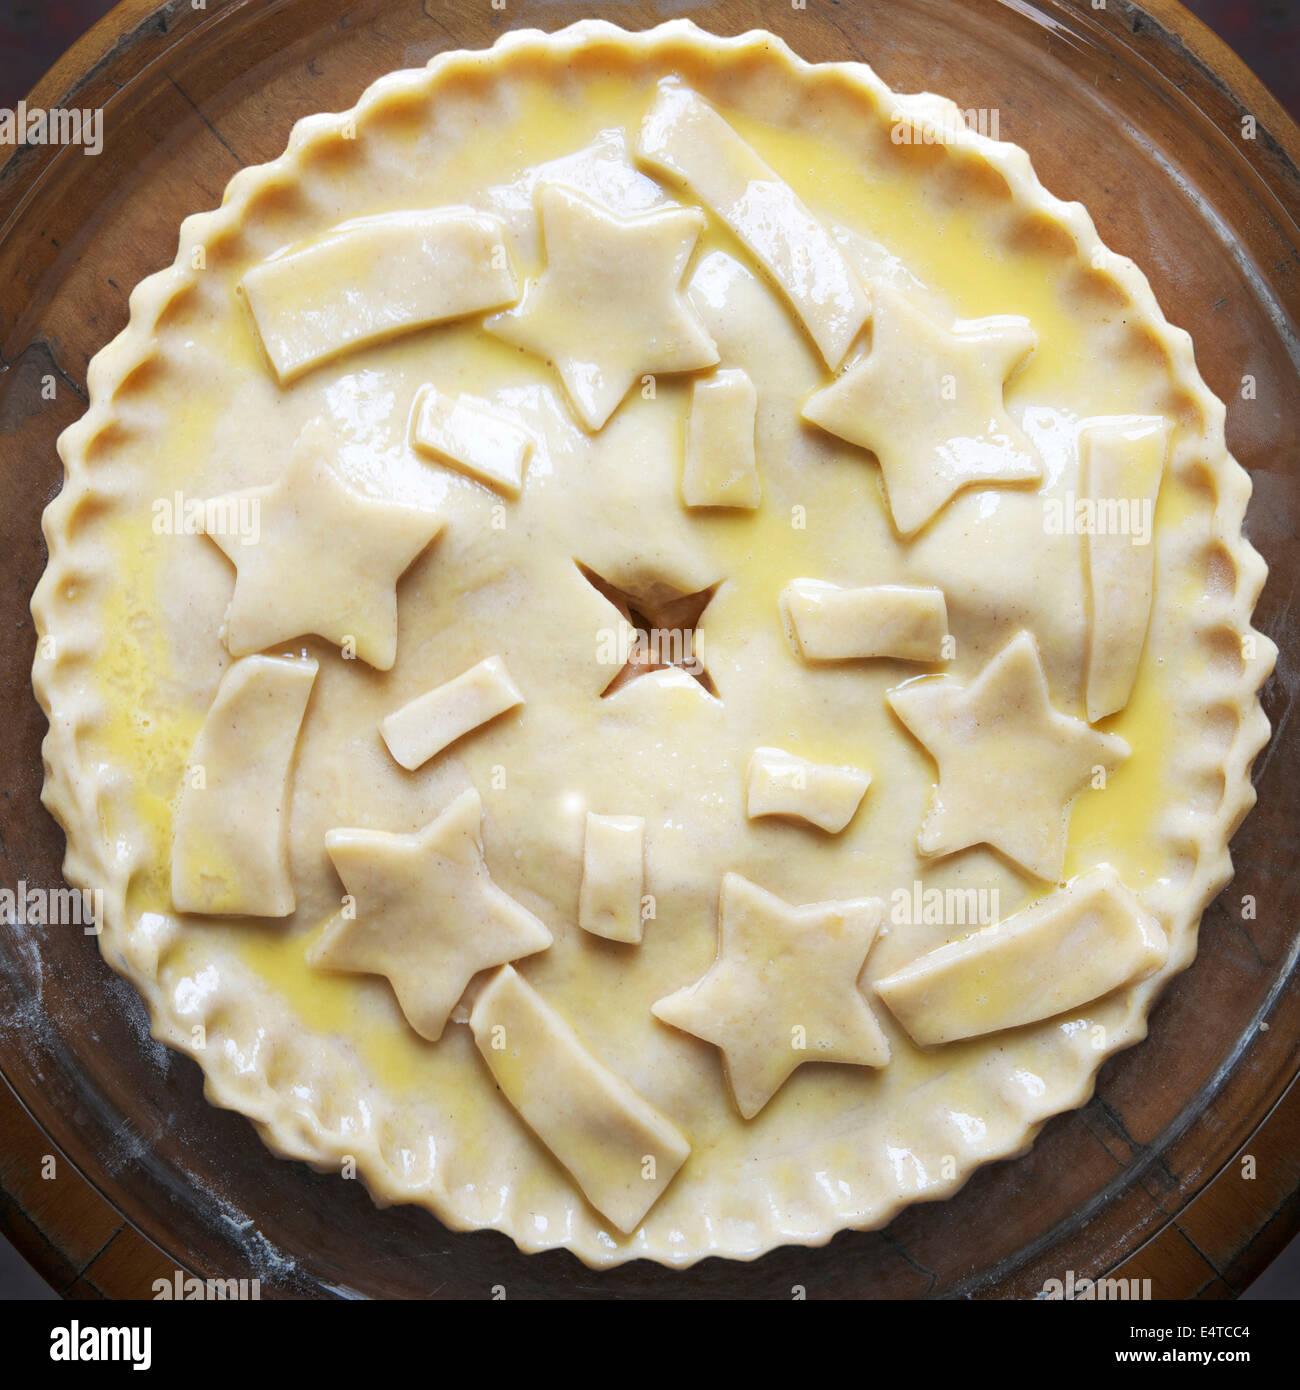 Overhead view of unbaked apple pie with star shaped cut-outs on top, studio shot Stock Photo